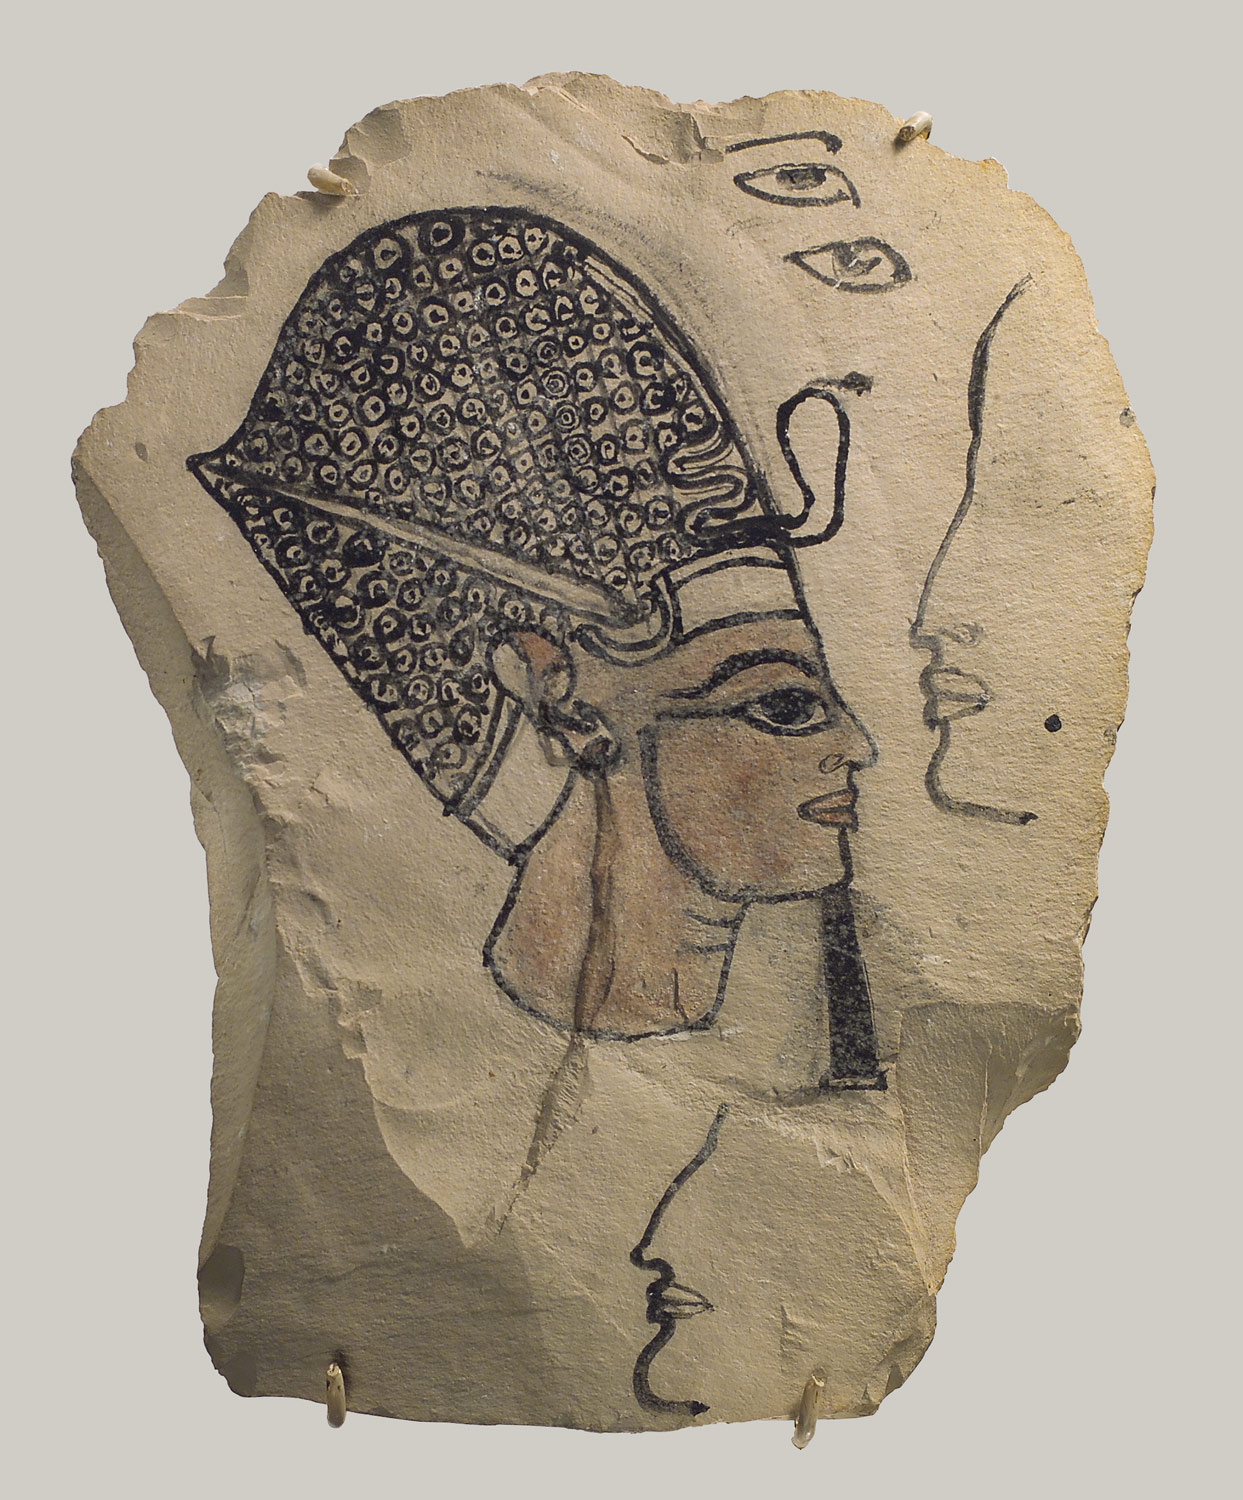 Artists sketch of Ramesses IV